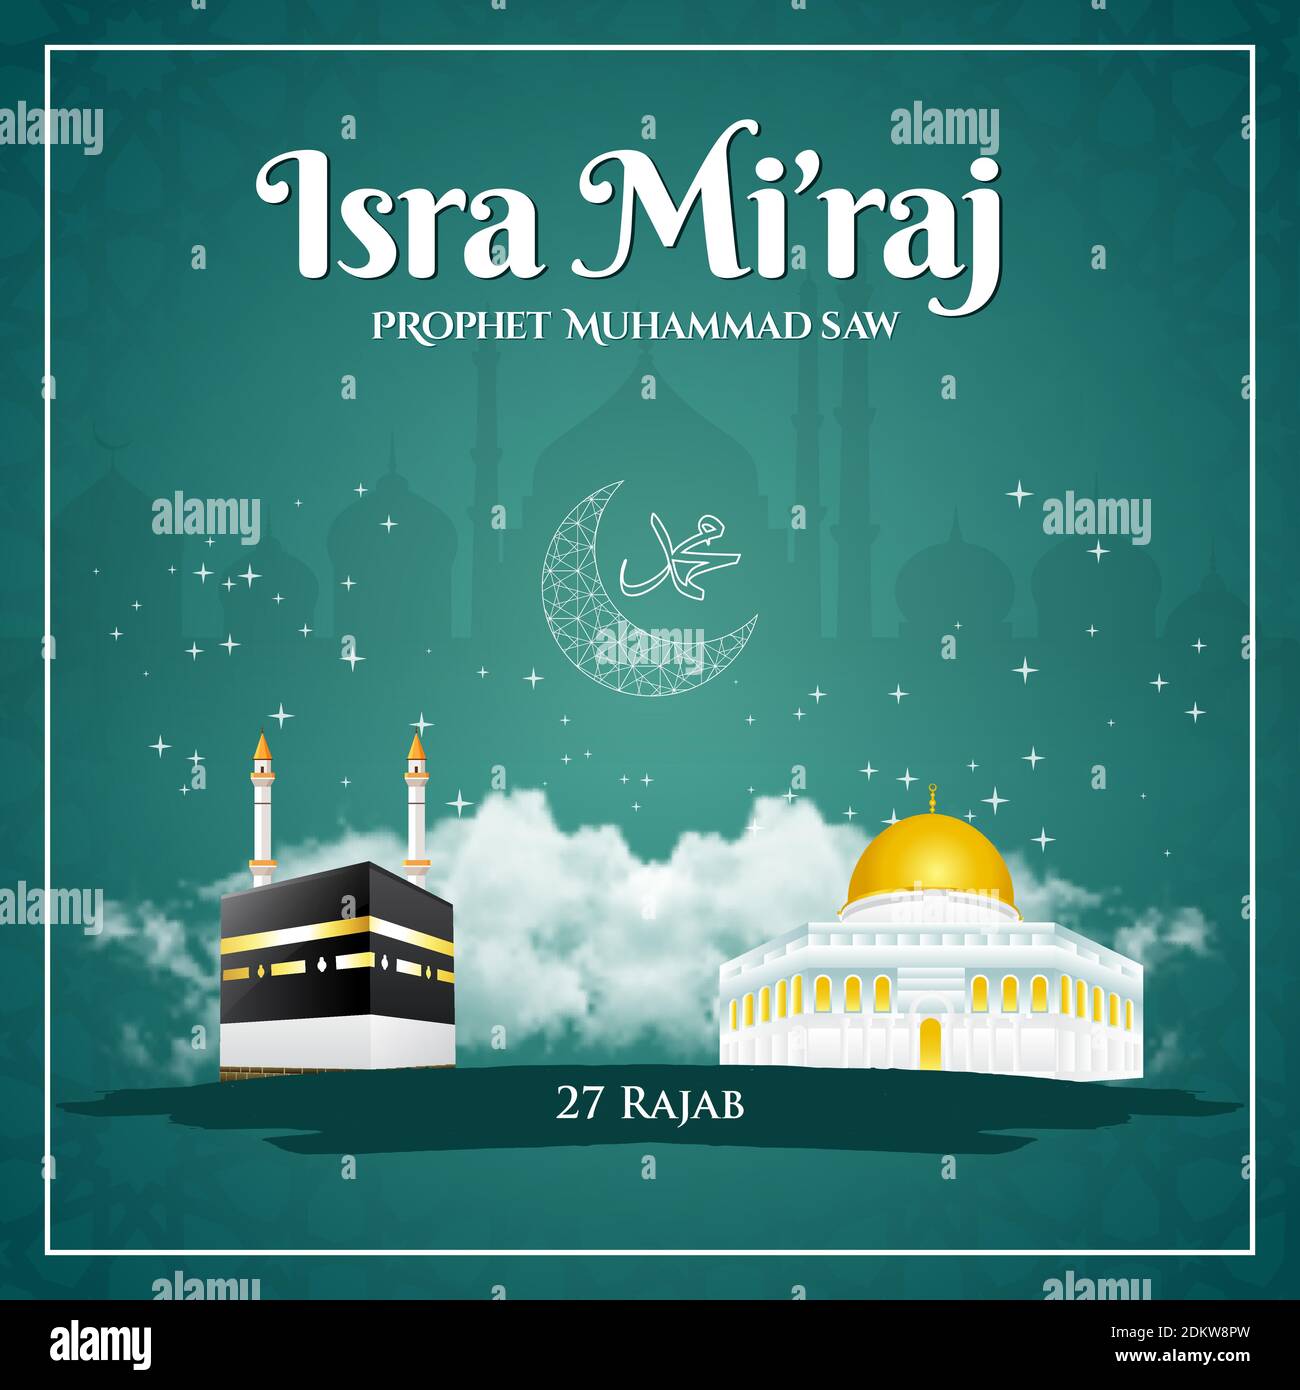 Isra And Miraj High Resolution Stock Photography and Images - Alamy